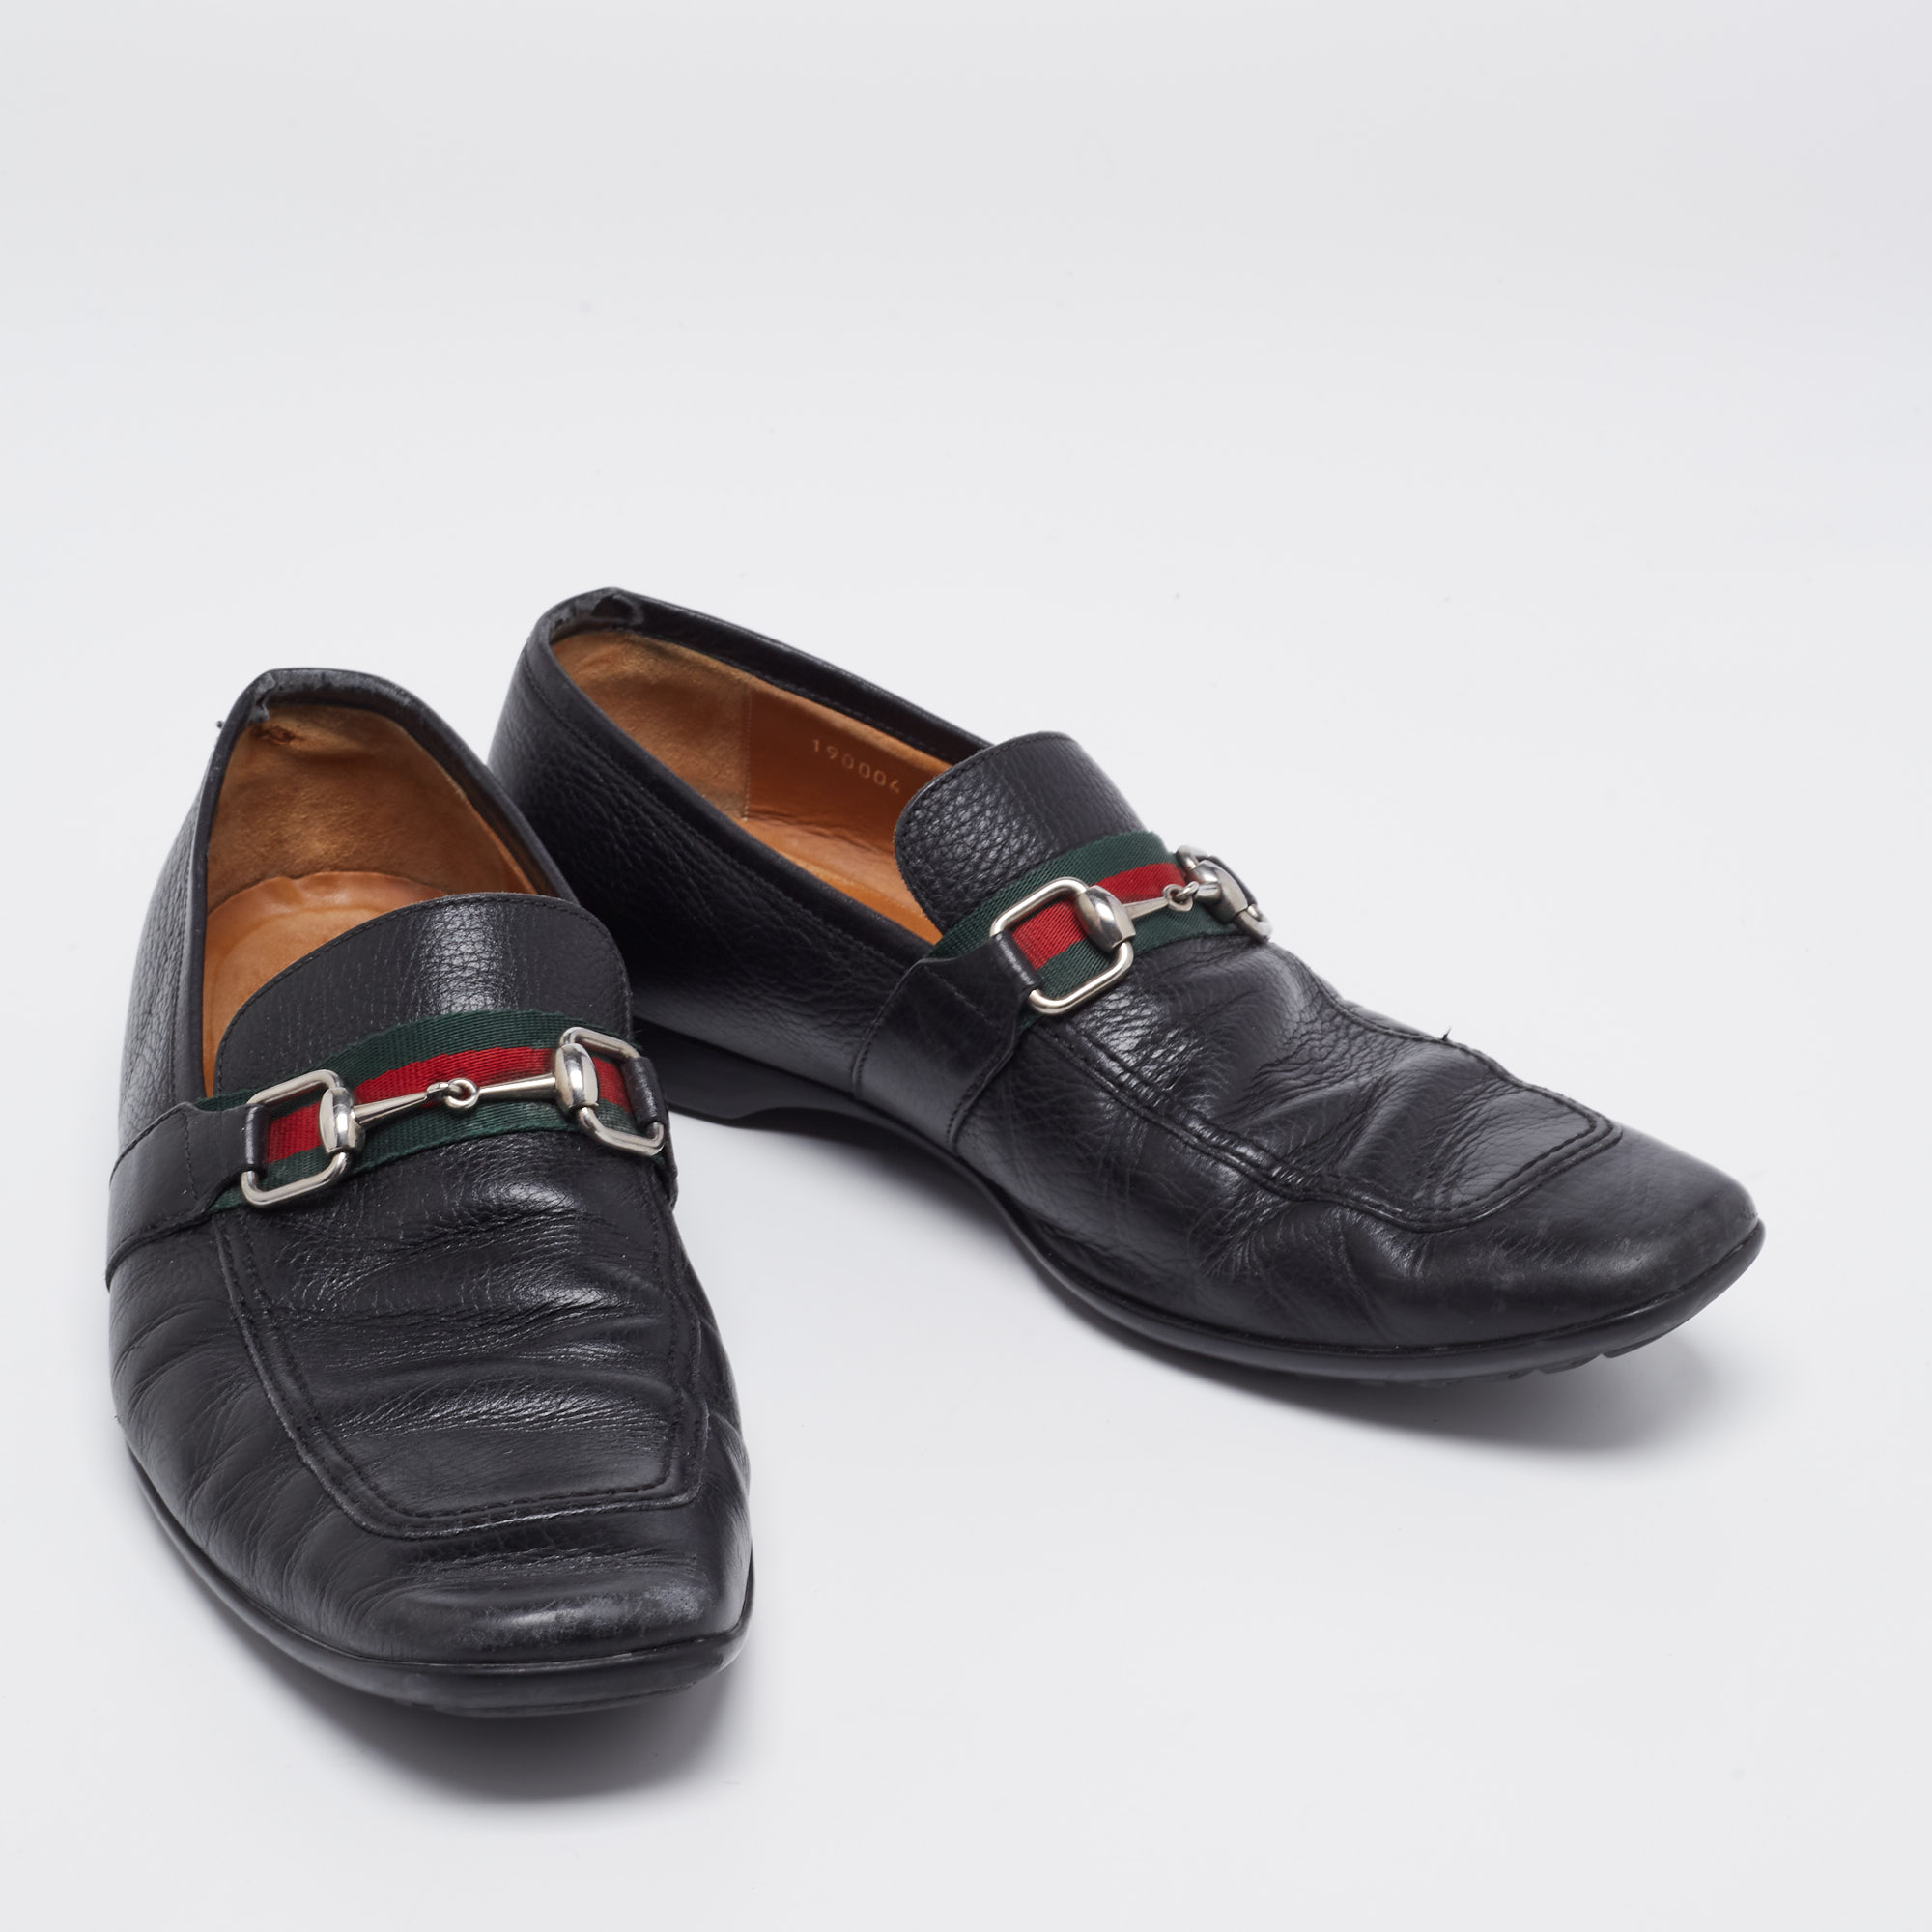 Gucci Black Leather Horsebit Web Detail Slip On Loafers Size 44.5